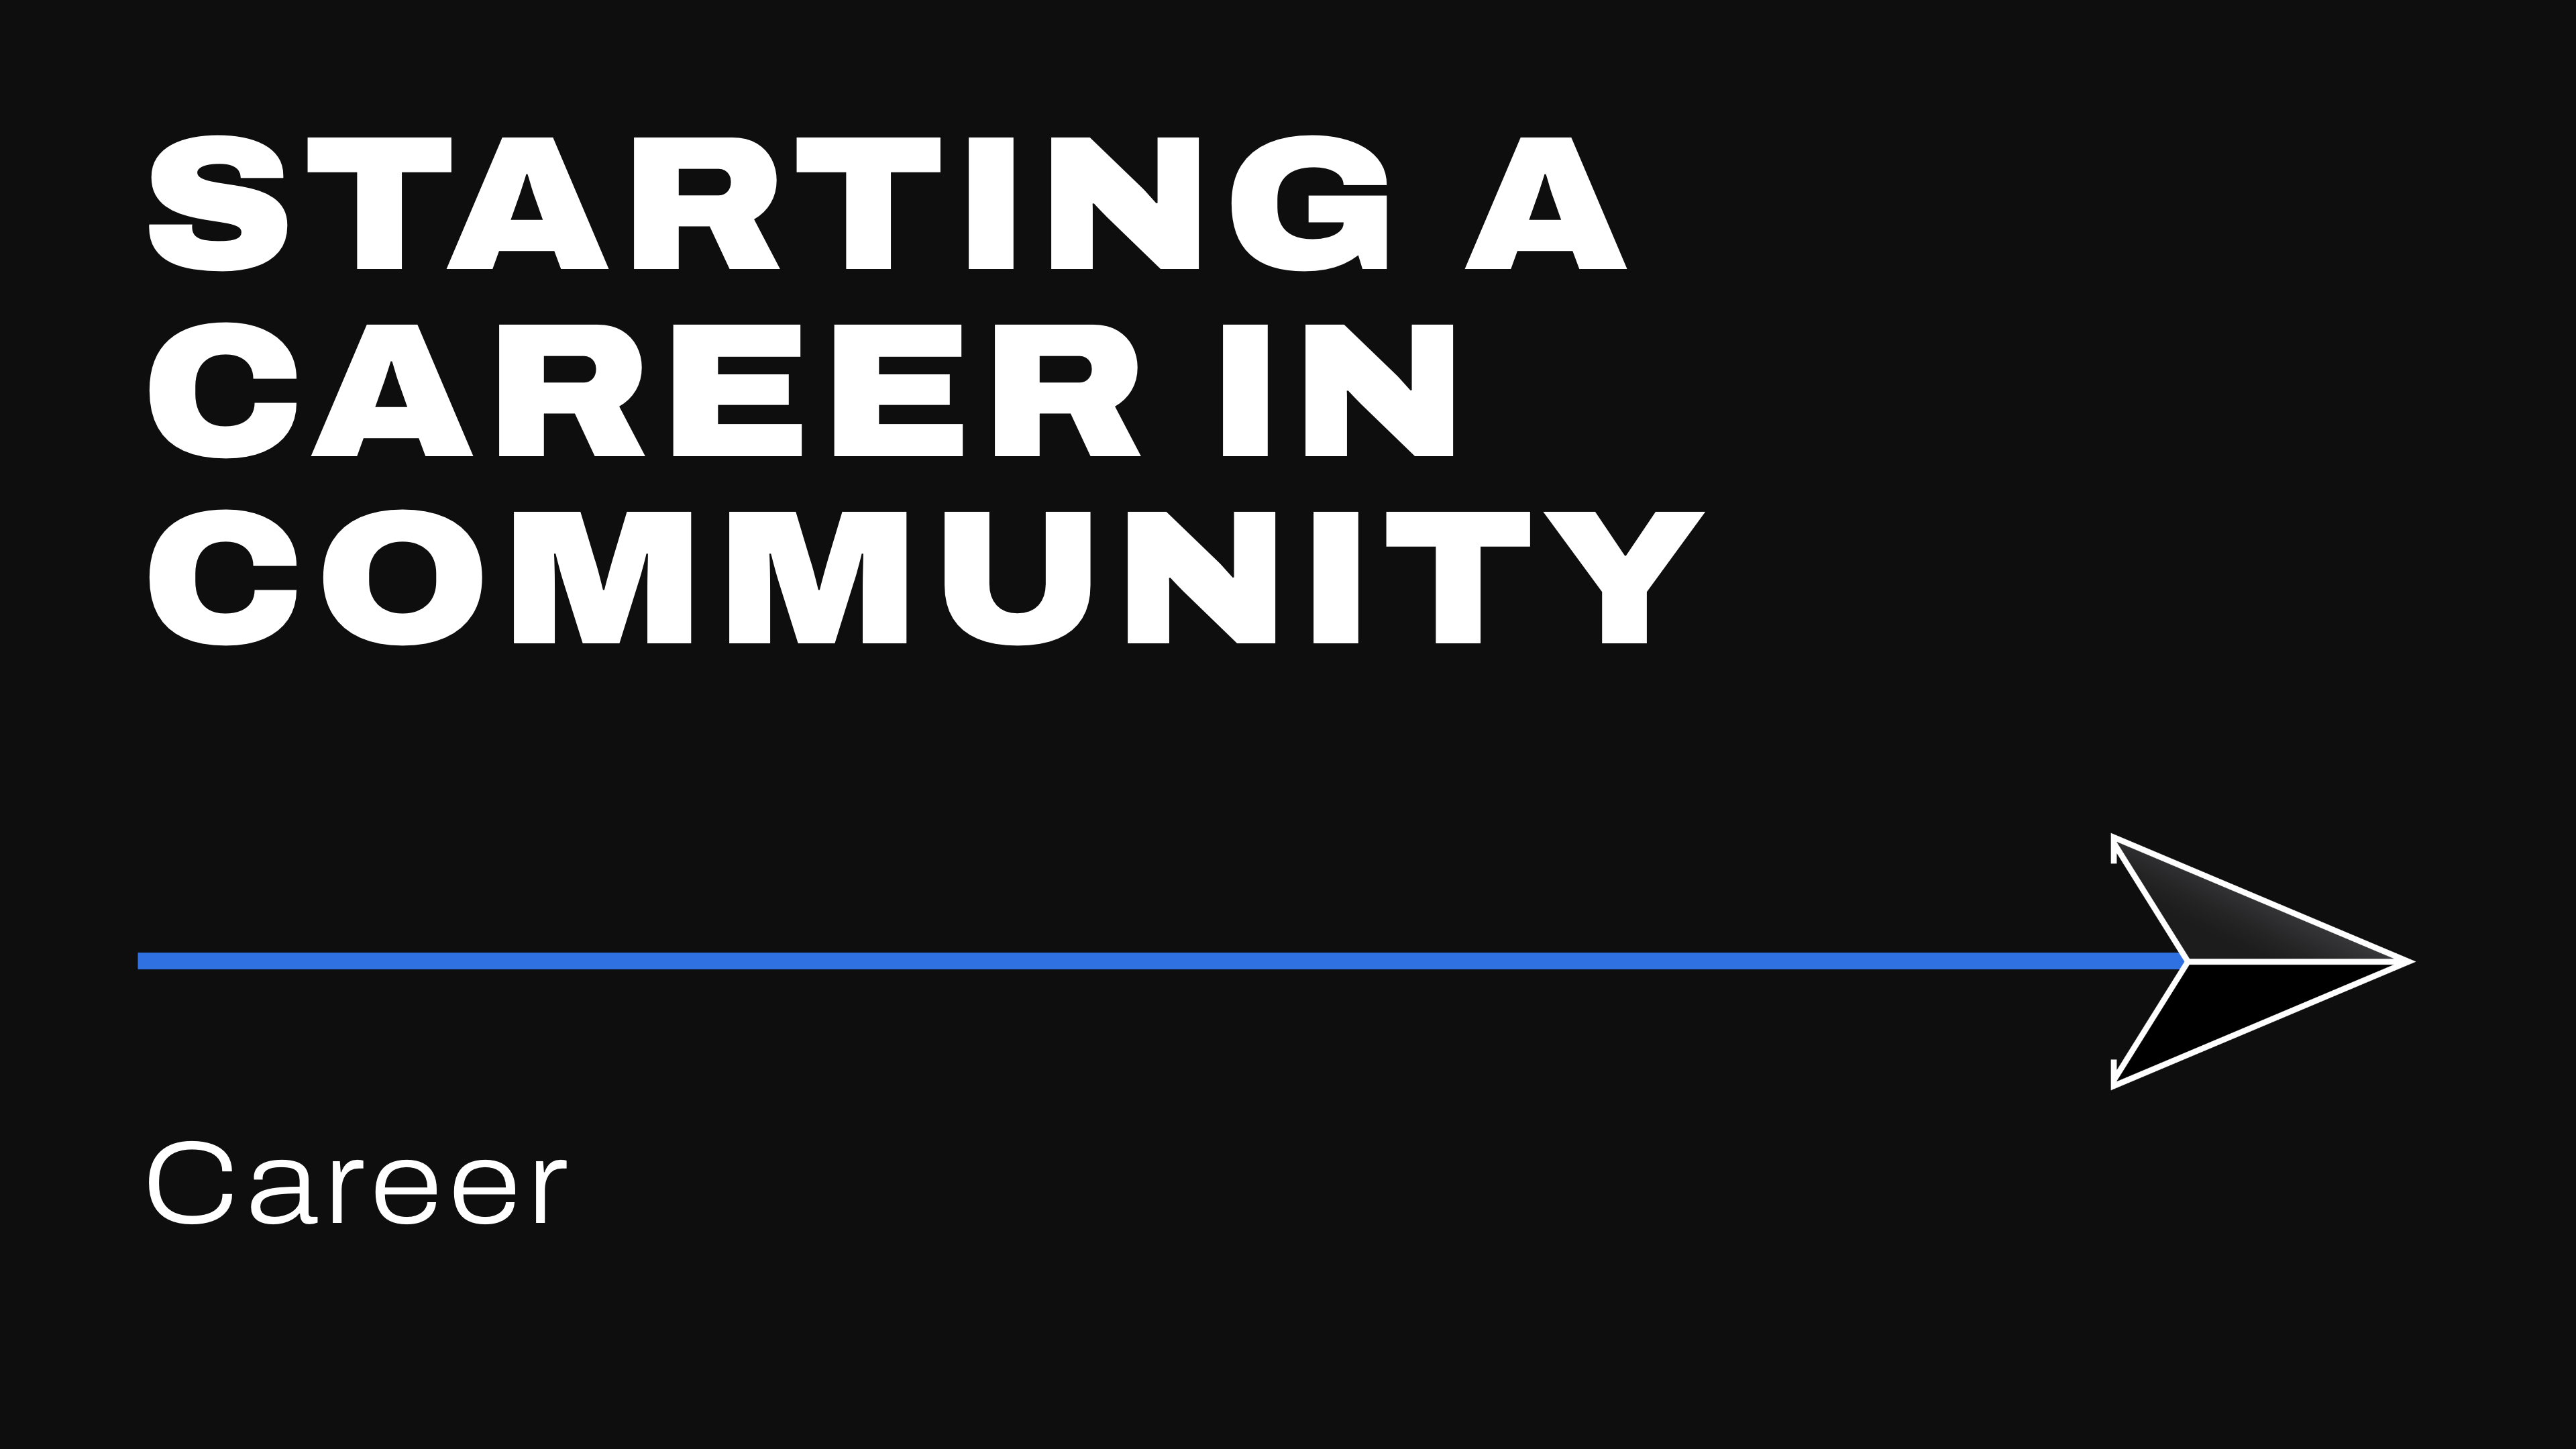 Starting a Career in Community